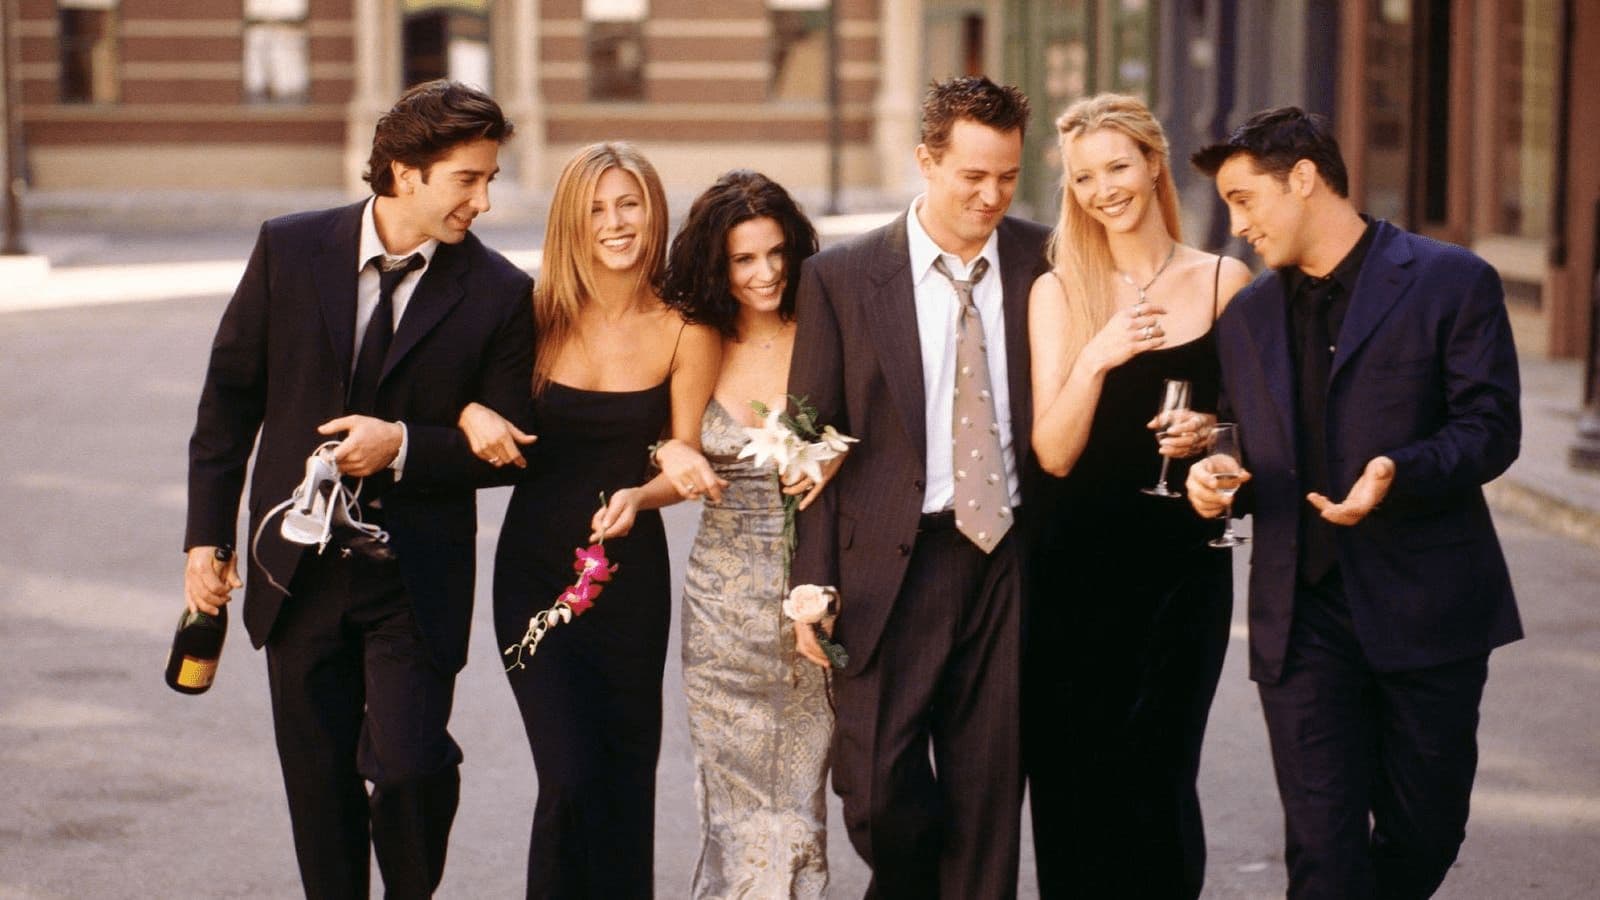 5 Life Lessons We Can All Learn from Chandler Bing